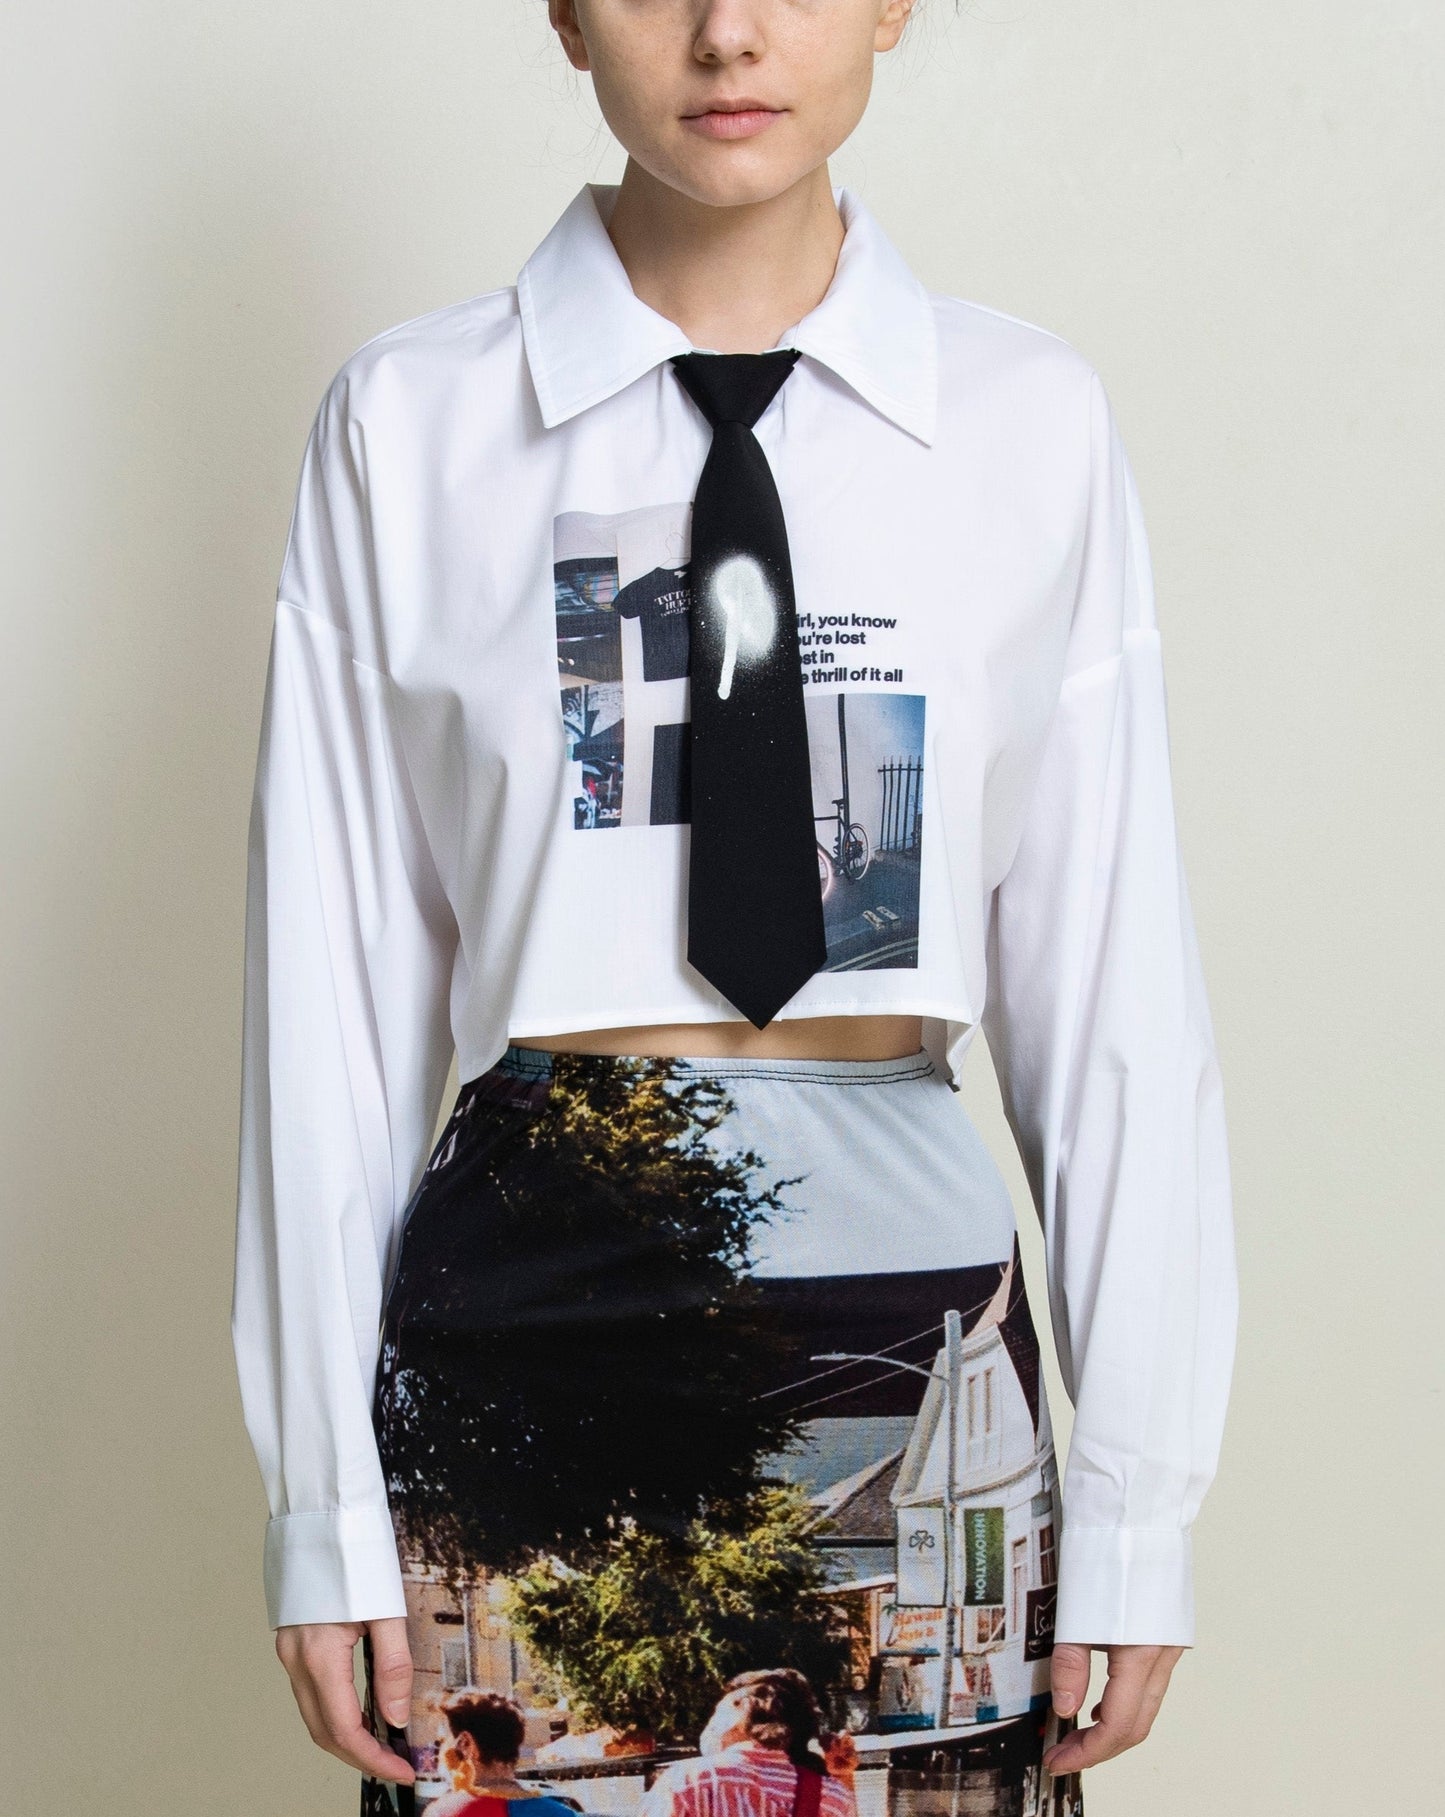 dydoshop - Lost Girl Shirt and Tie Set